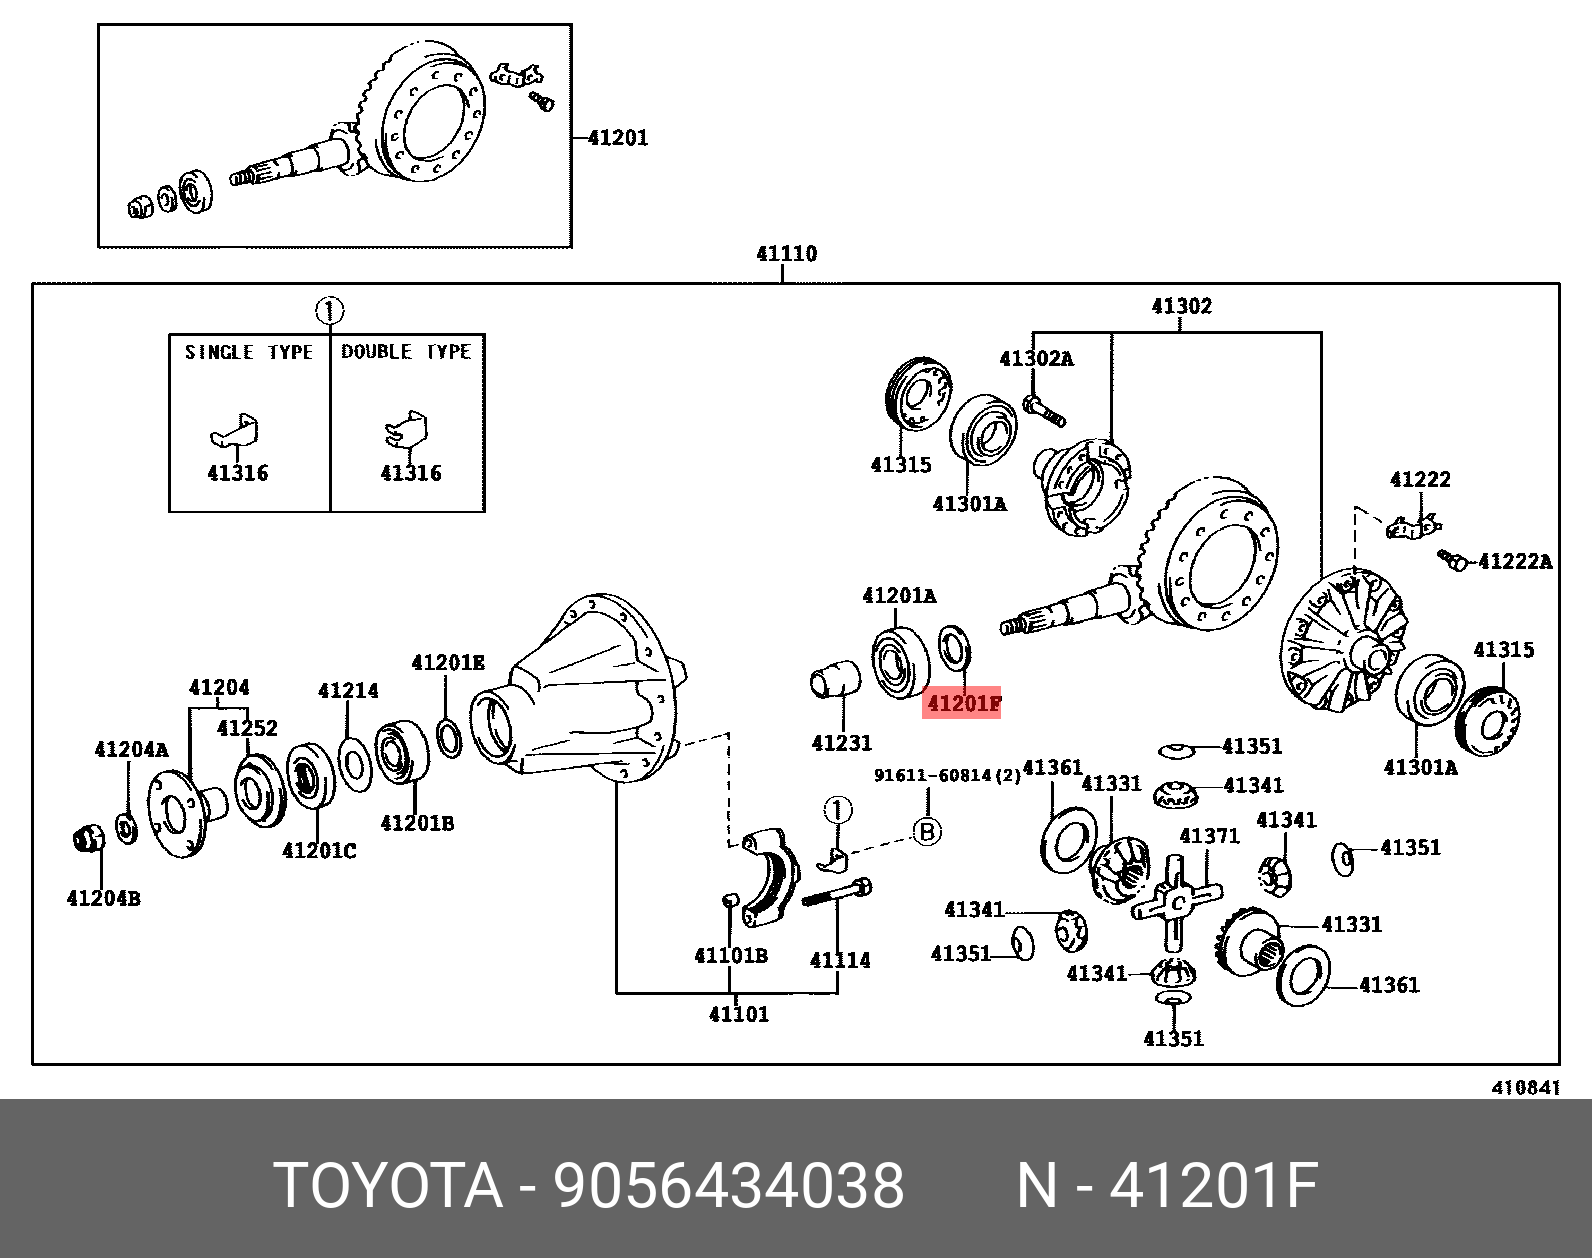 9056434038, HARRIER 199712-200302, ACU1#, MCU1#, SXU1#, WASHER, PLATE (FOR REAR DIFFERENTIAL DRIVE PINION)